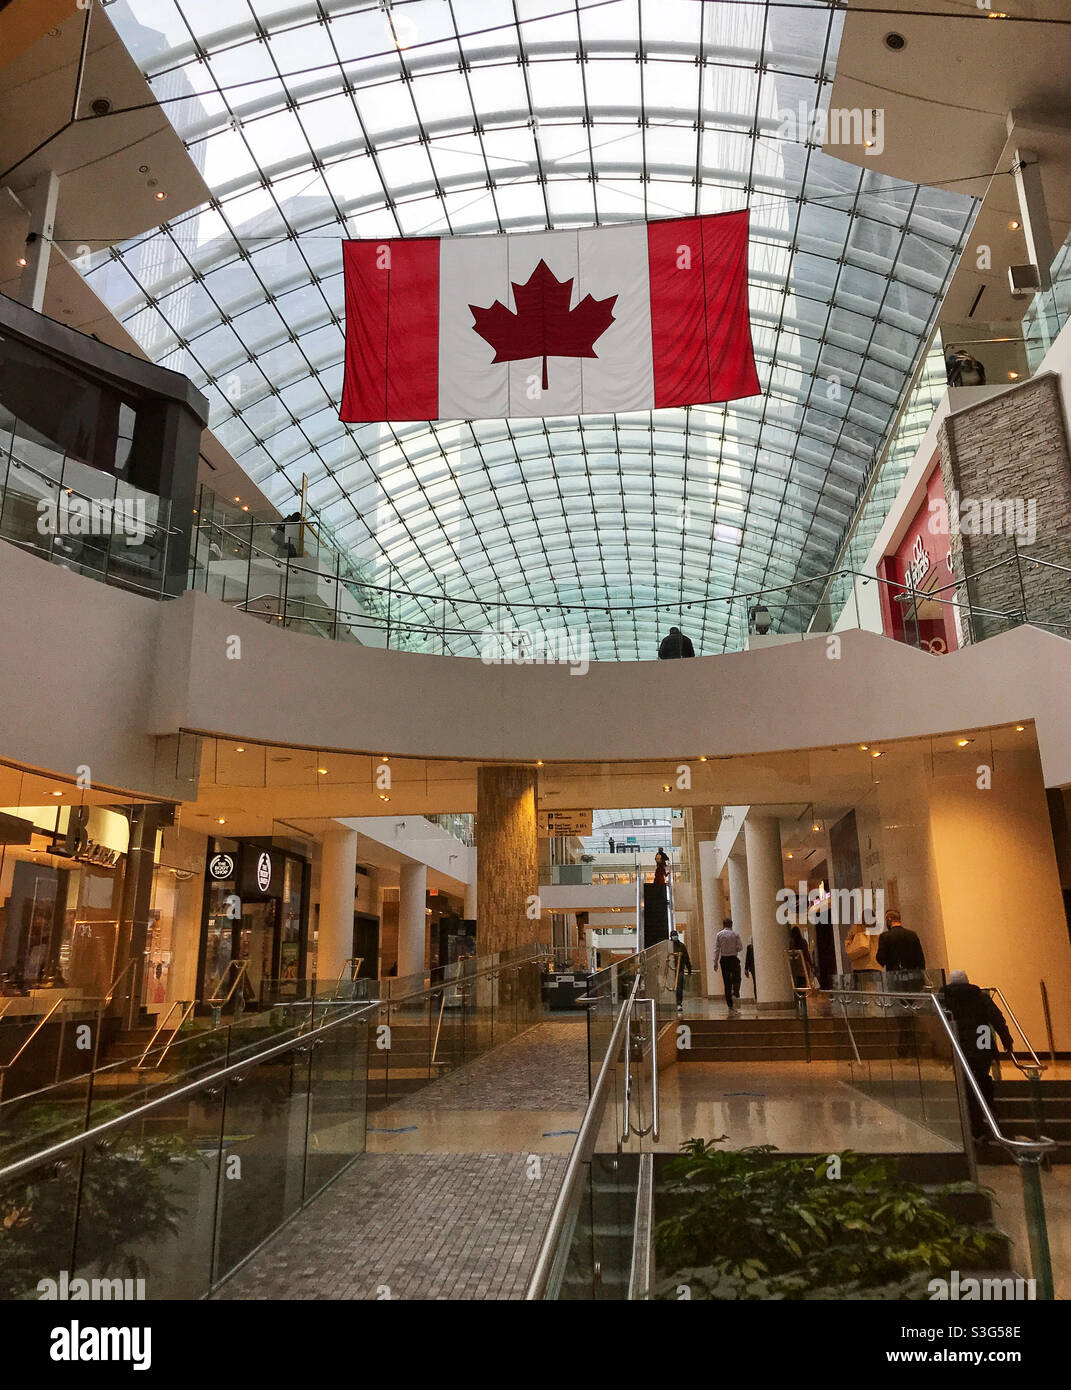 Canadian flag hanging from the glass ceiling of The Core shopping centre. Downtown Calgary, Alberta, Canada. Stock Photo